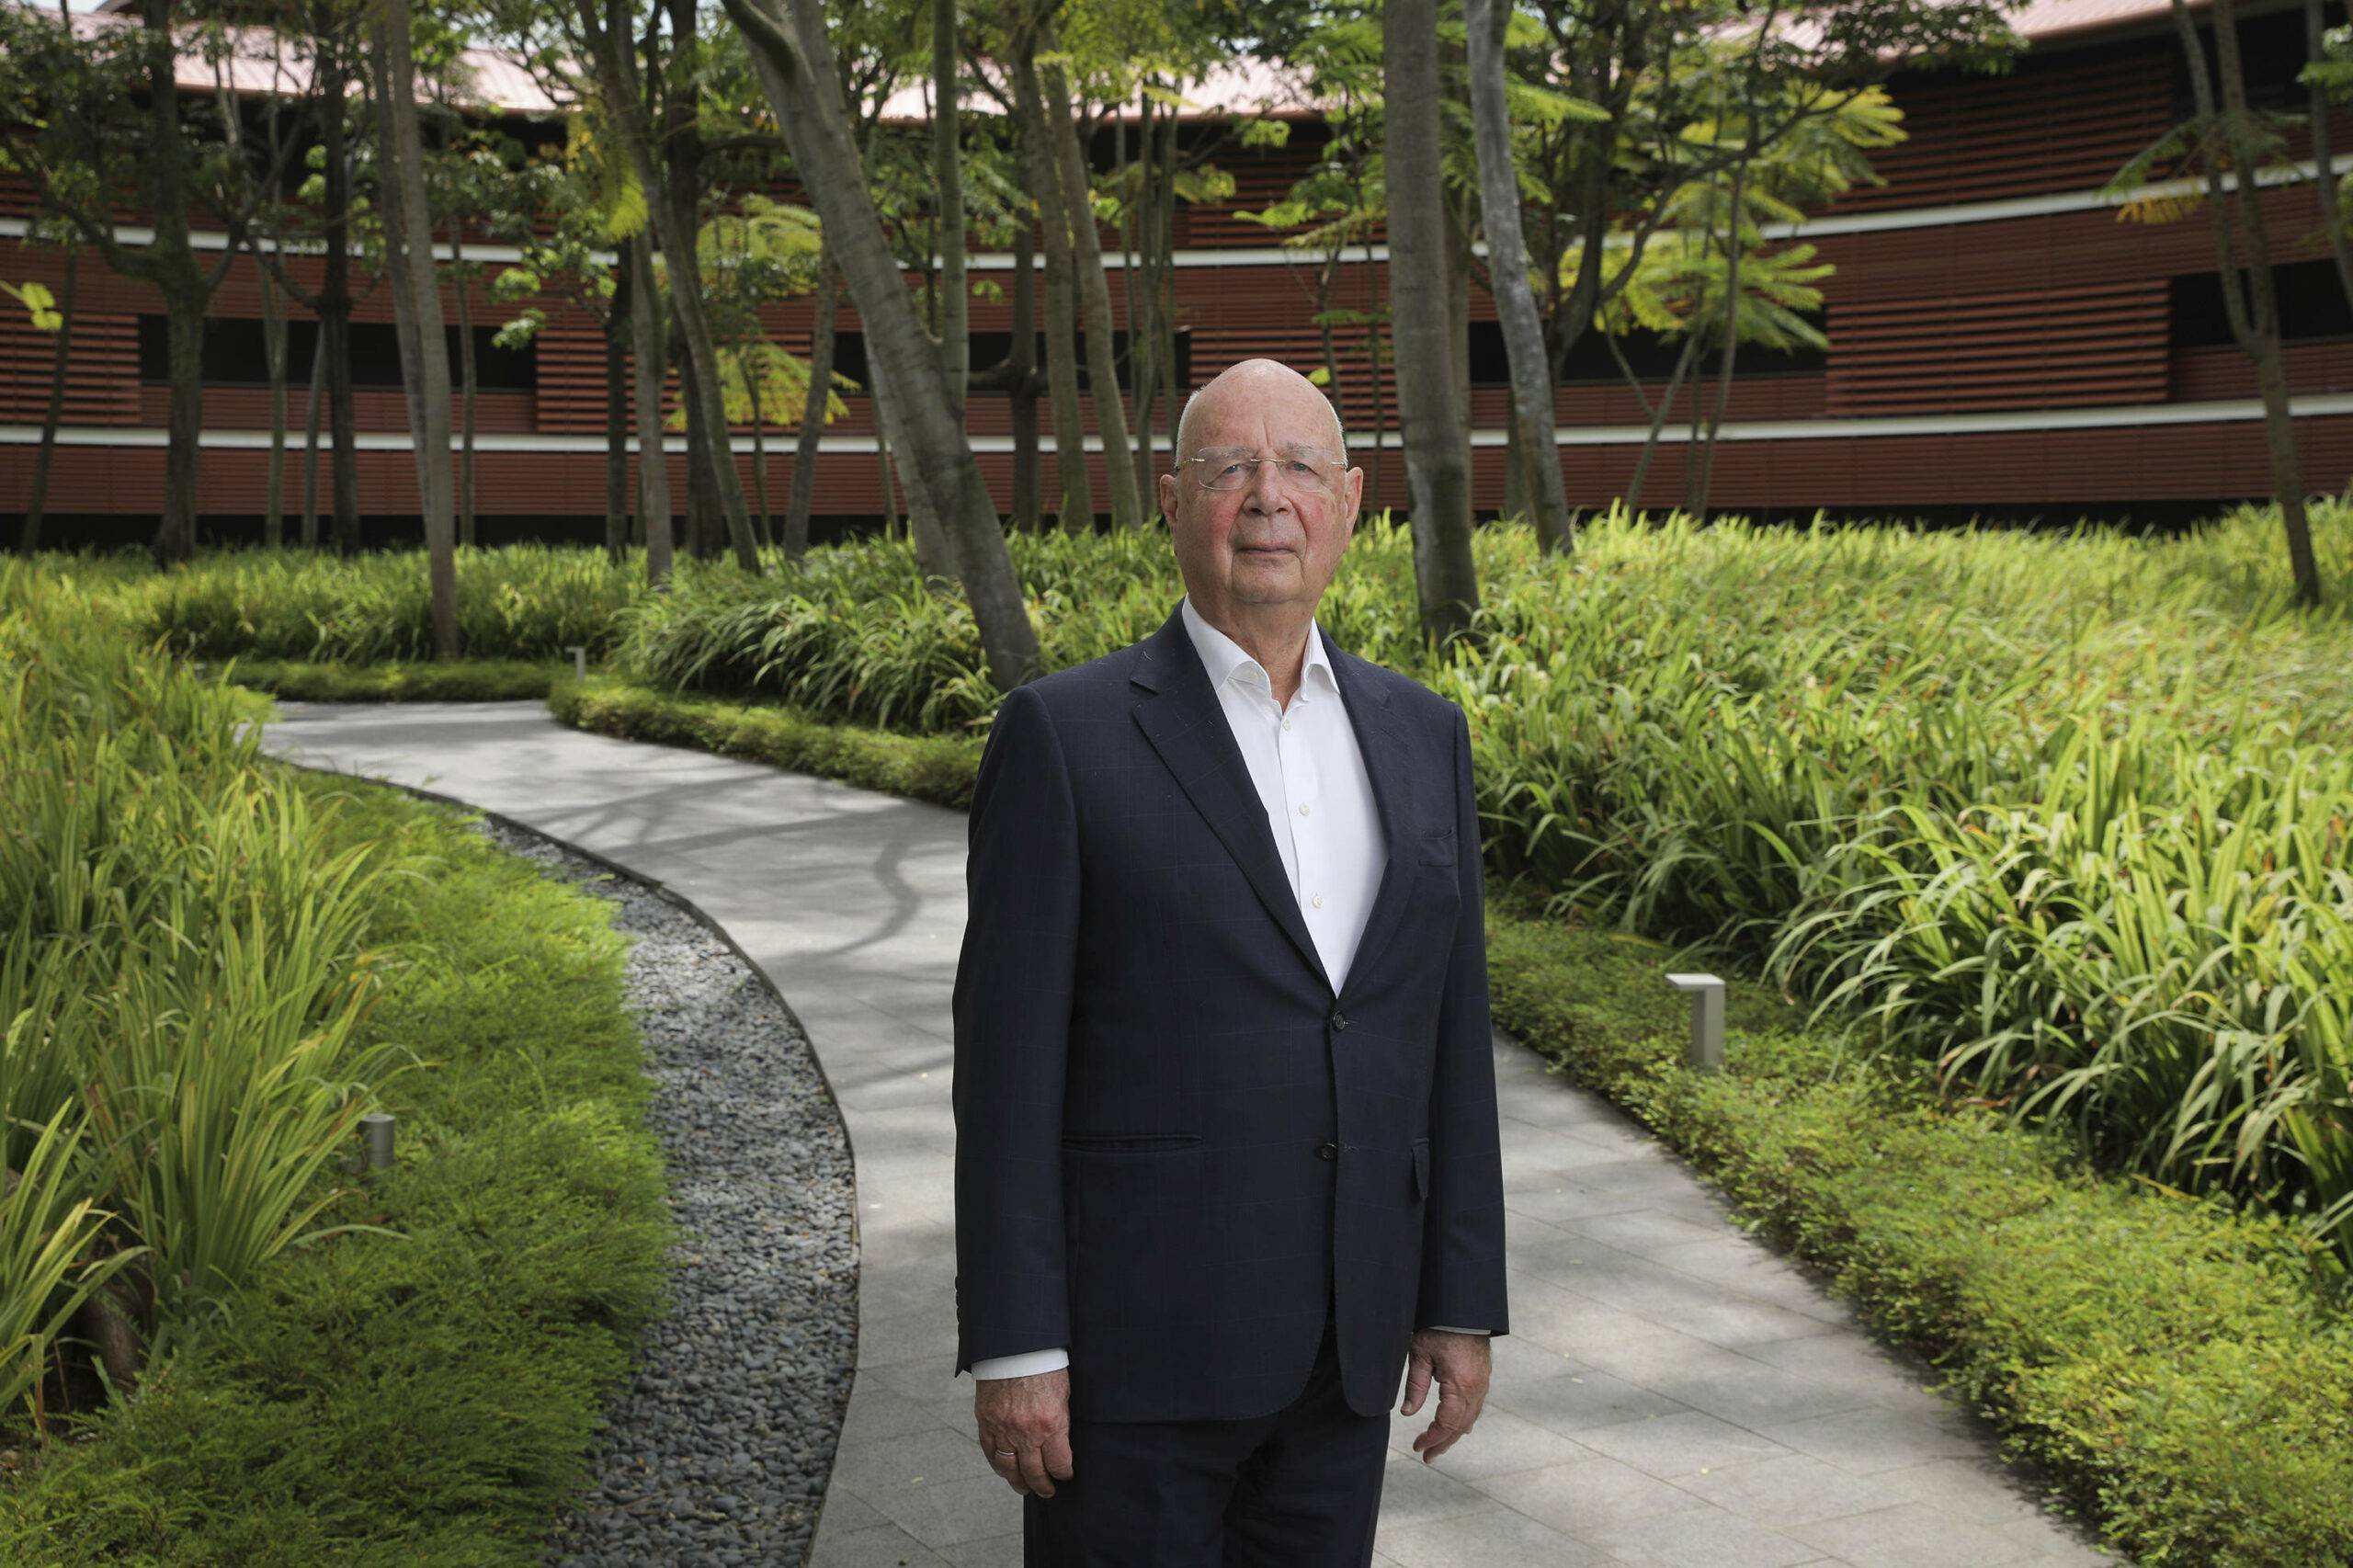 Professor Klaus Martin Schwab, founder and executive chairman of the World Economic Forum (WEF), photographed on 9 February 2021. (Singapore Press via AP Images)/HOSPH/21046168797945/For editorial use only.  Please contact your AP representative with any questions.  SINGAPORE OUT./2102150544